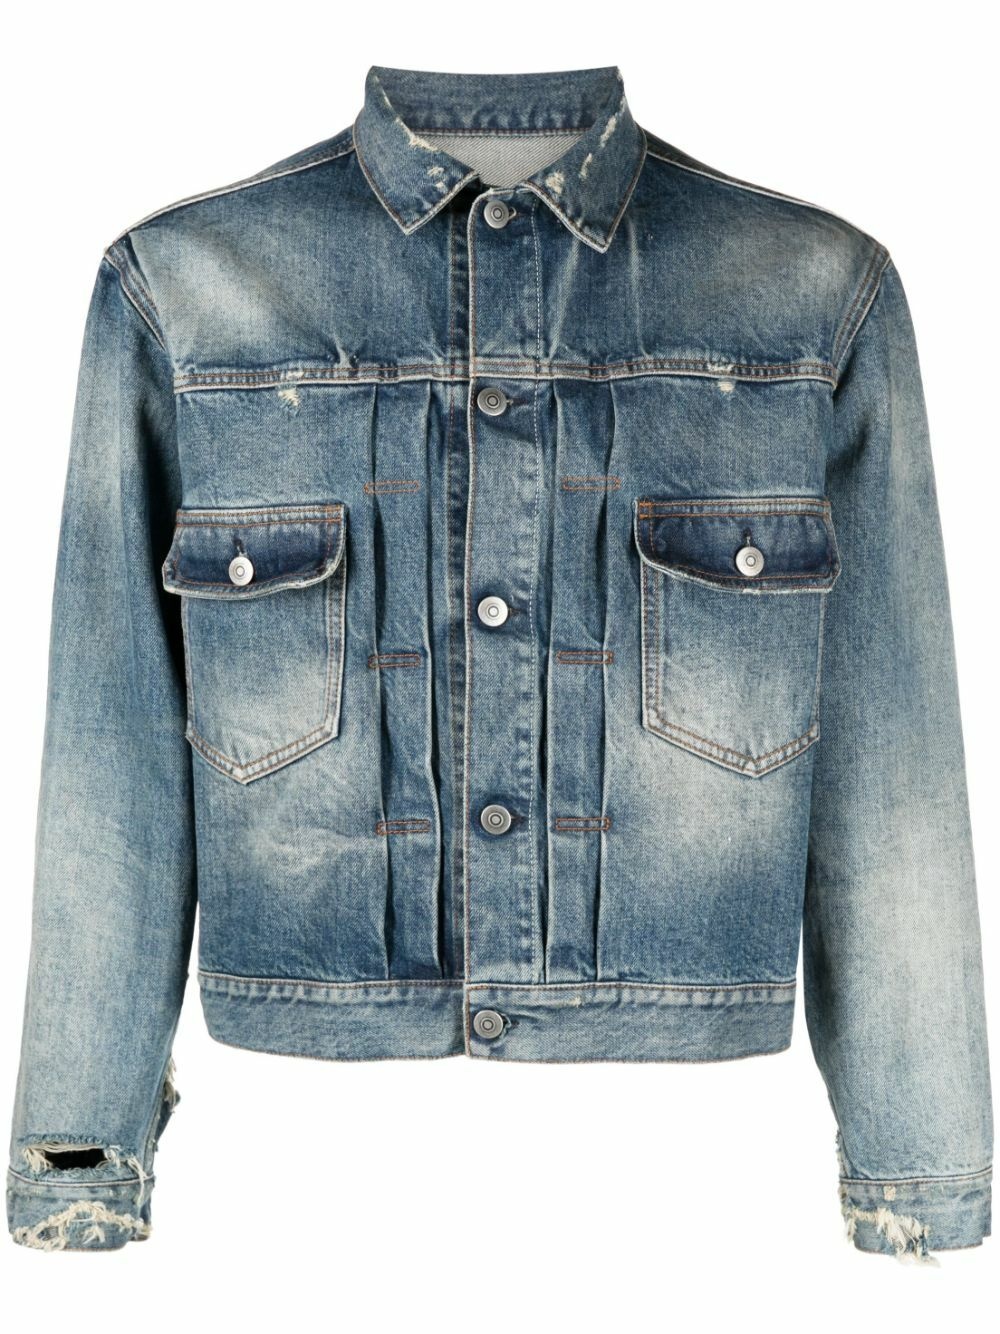 Men's Convertible Leather And Denim Jacket by Vtmnts